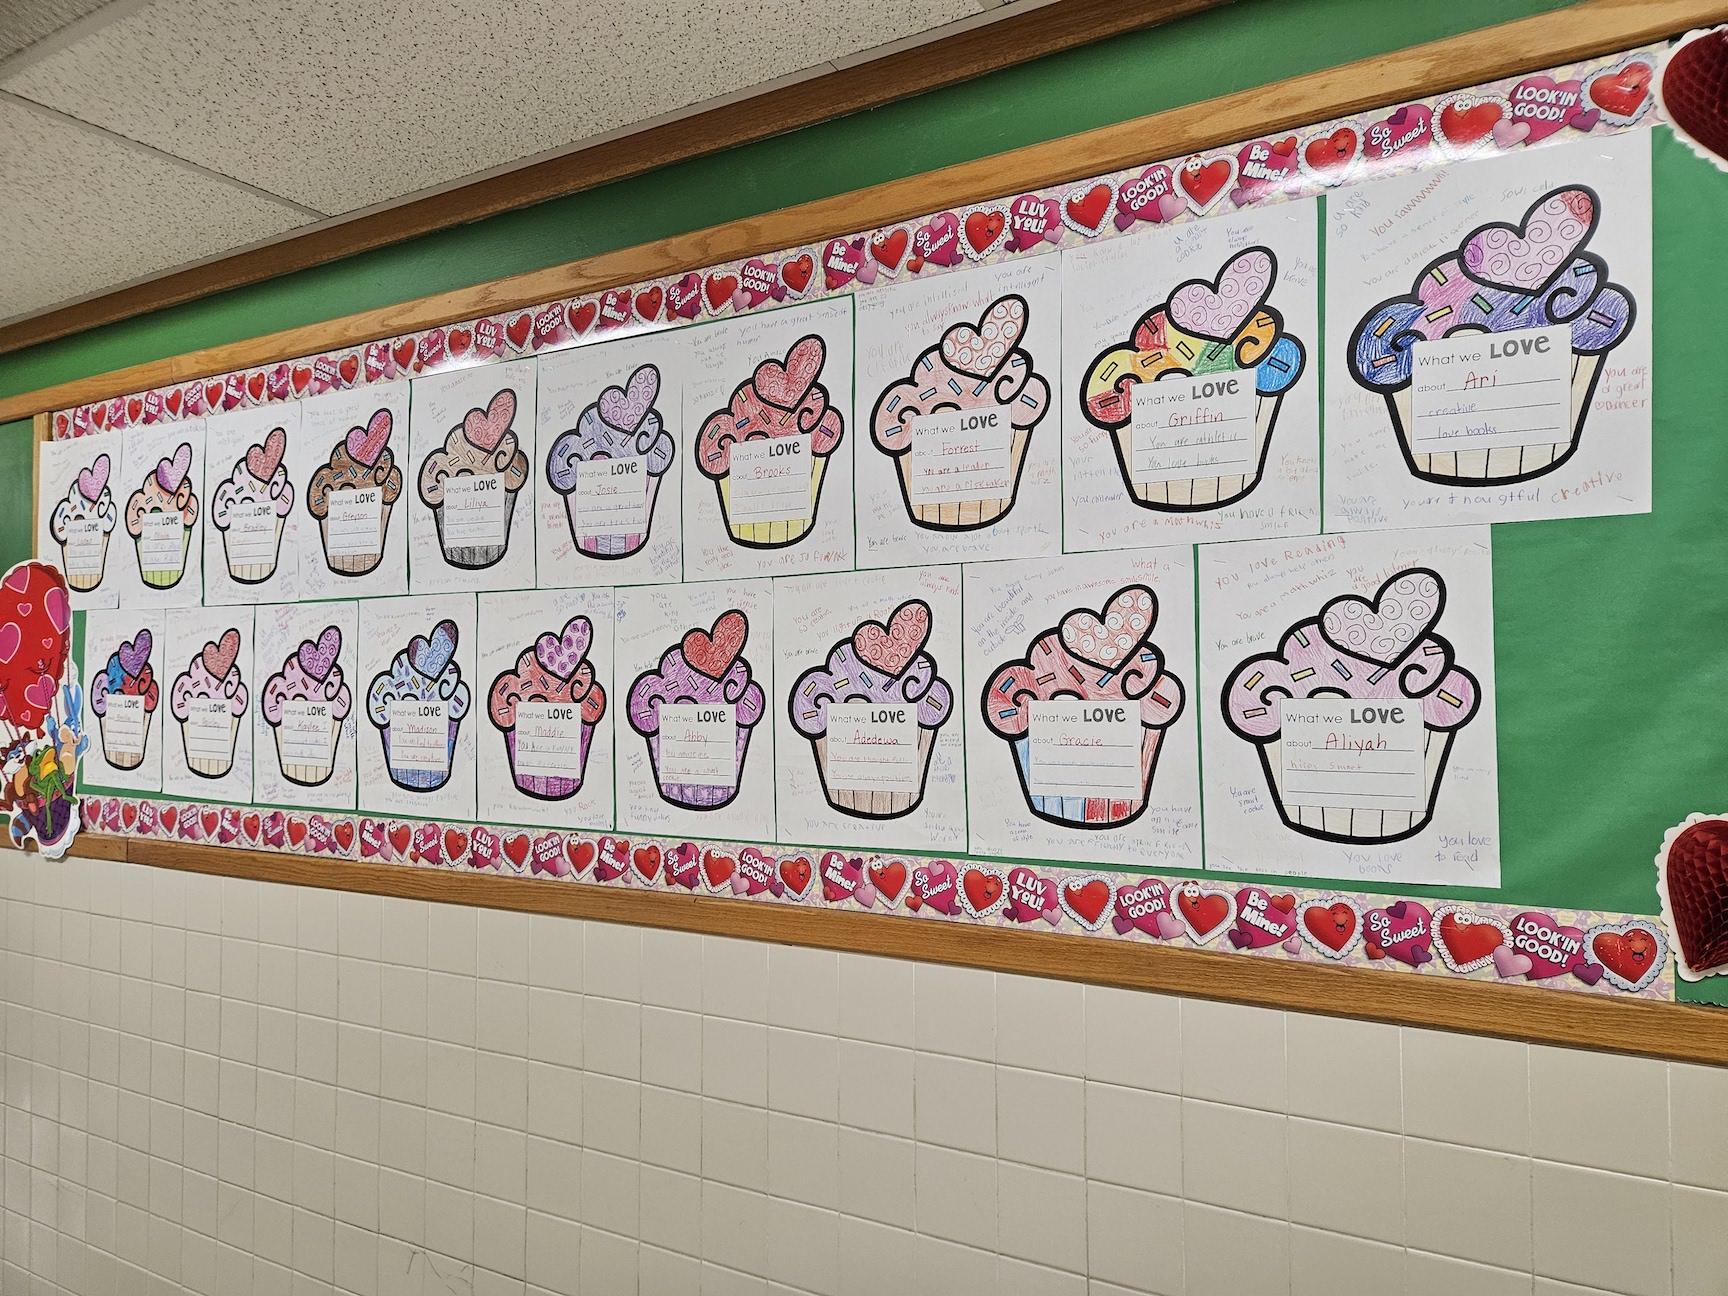 The cupcakes made a colorful bulletin board